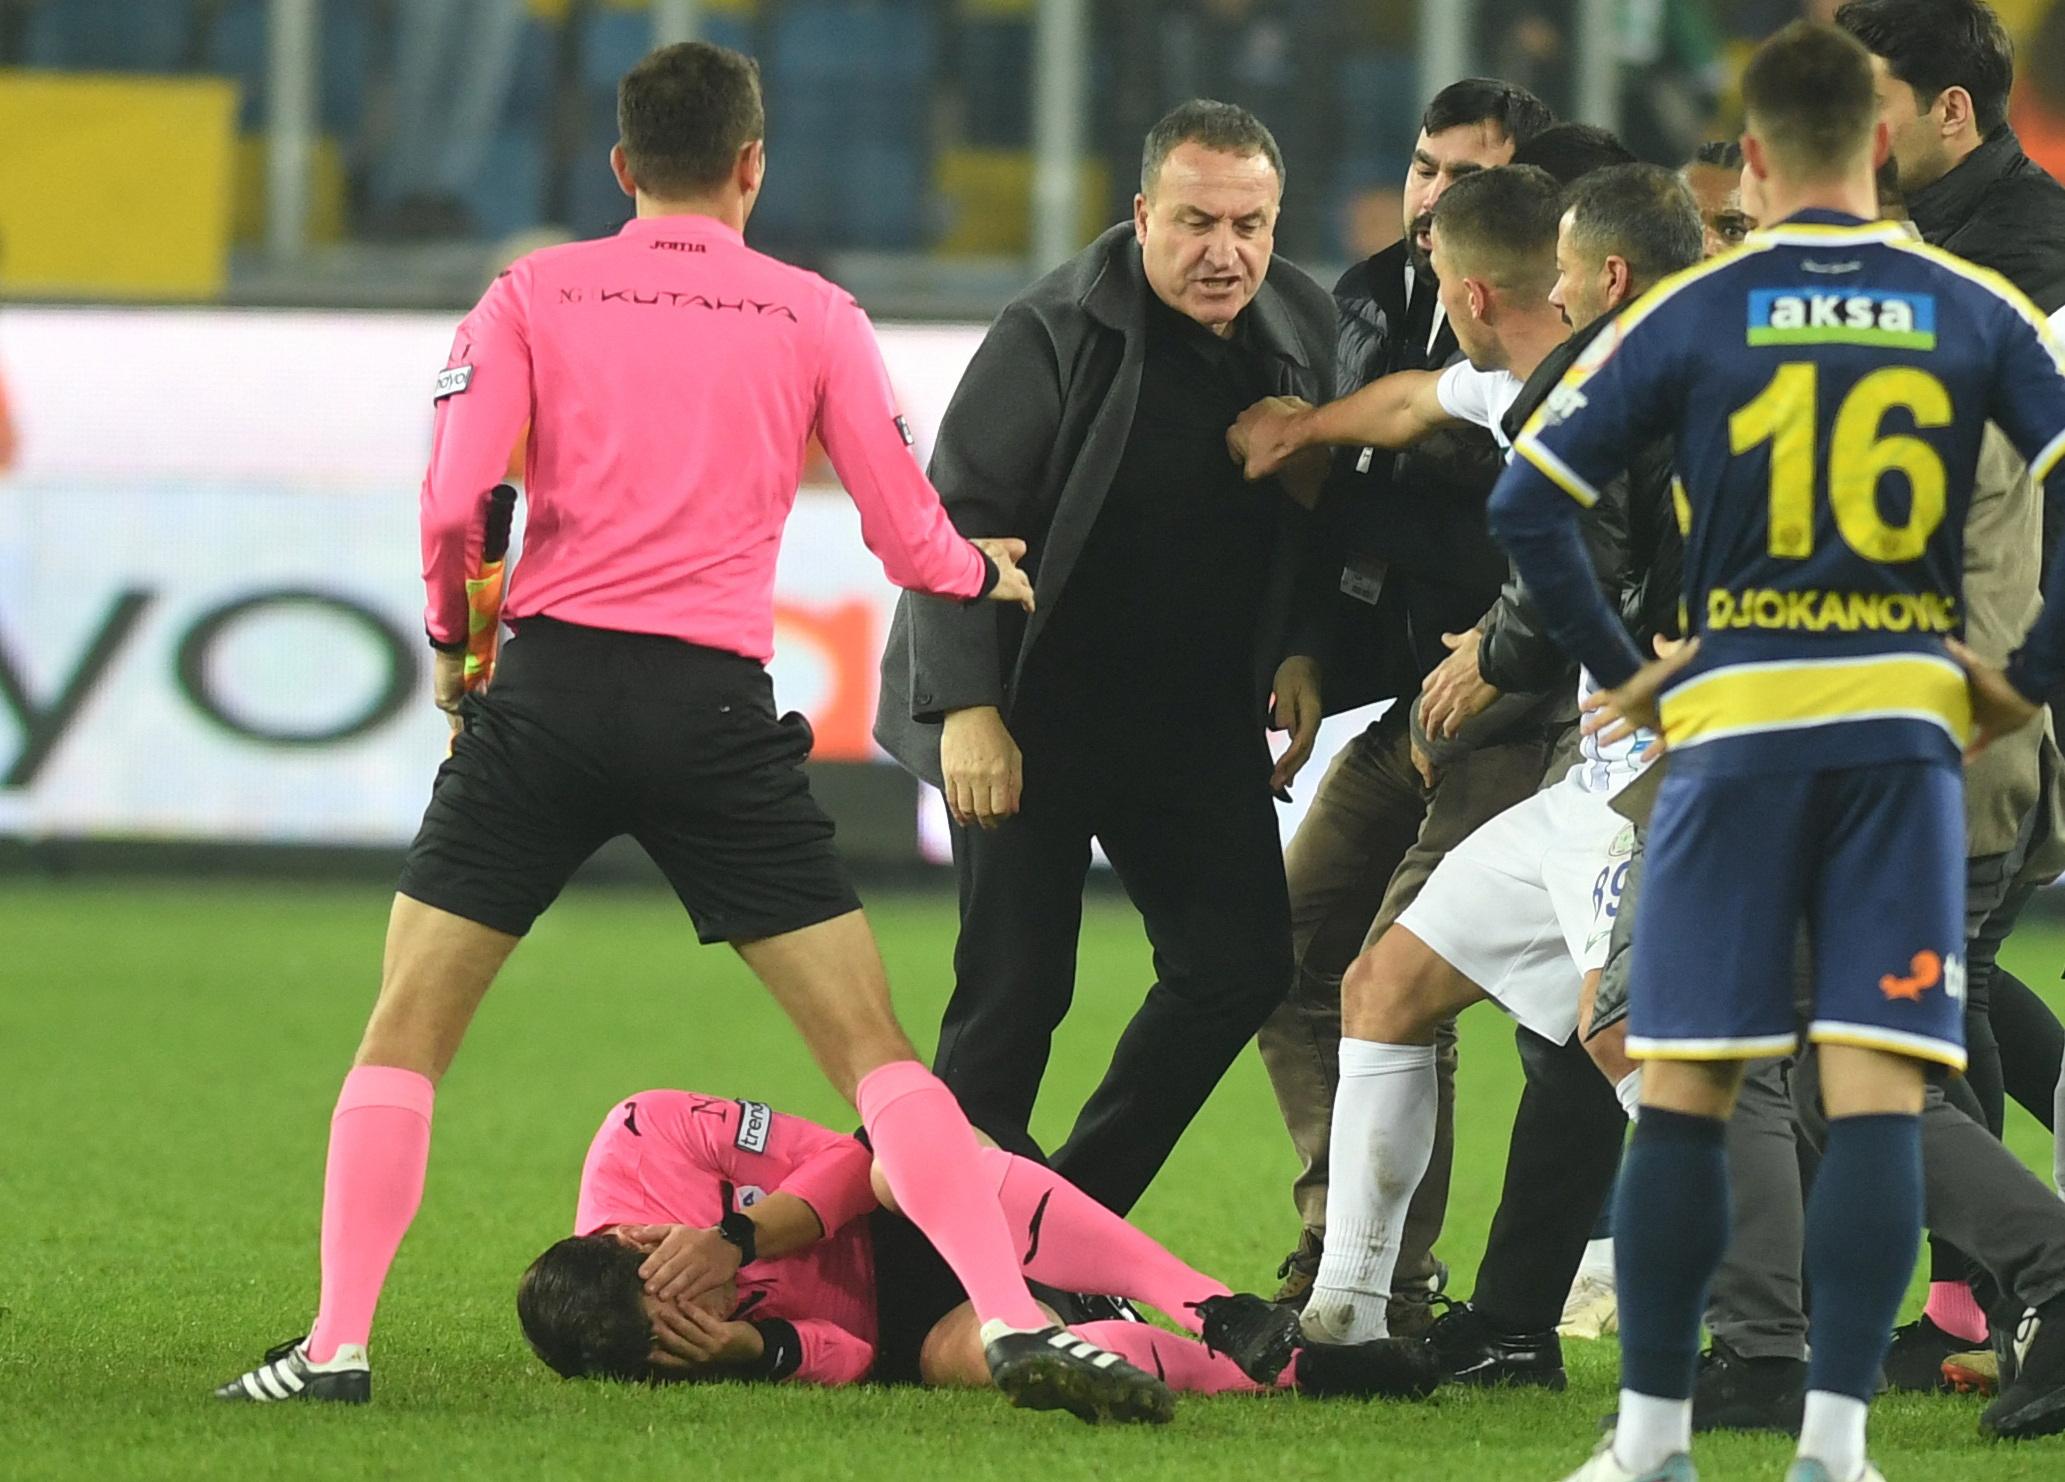 Turkish Soccer Club President Arrested For Attacking Referee After Game